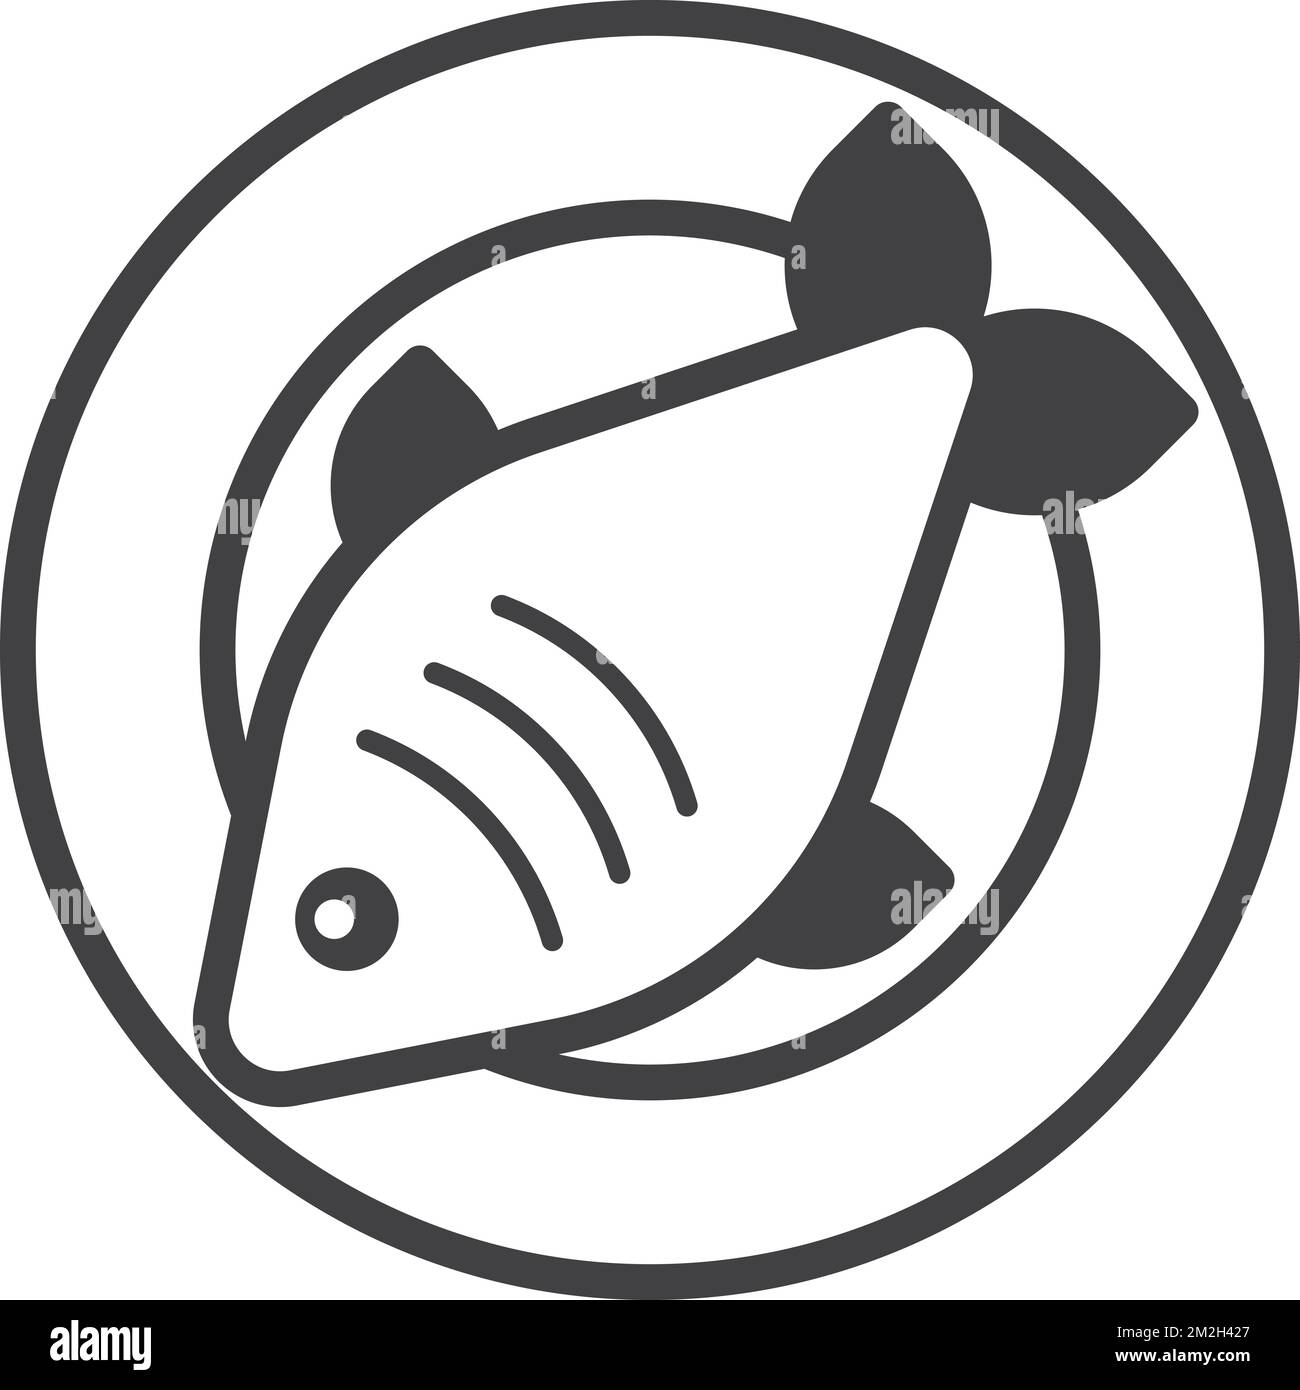 boiled fish and dishes illustration in minimal style isolated on background Stock Vector